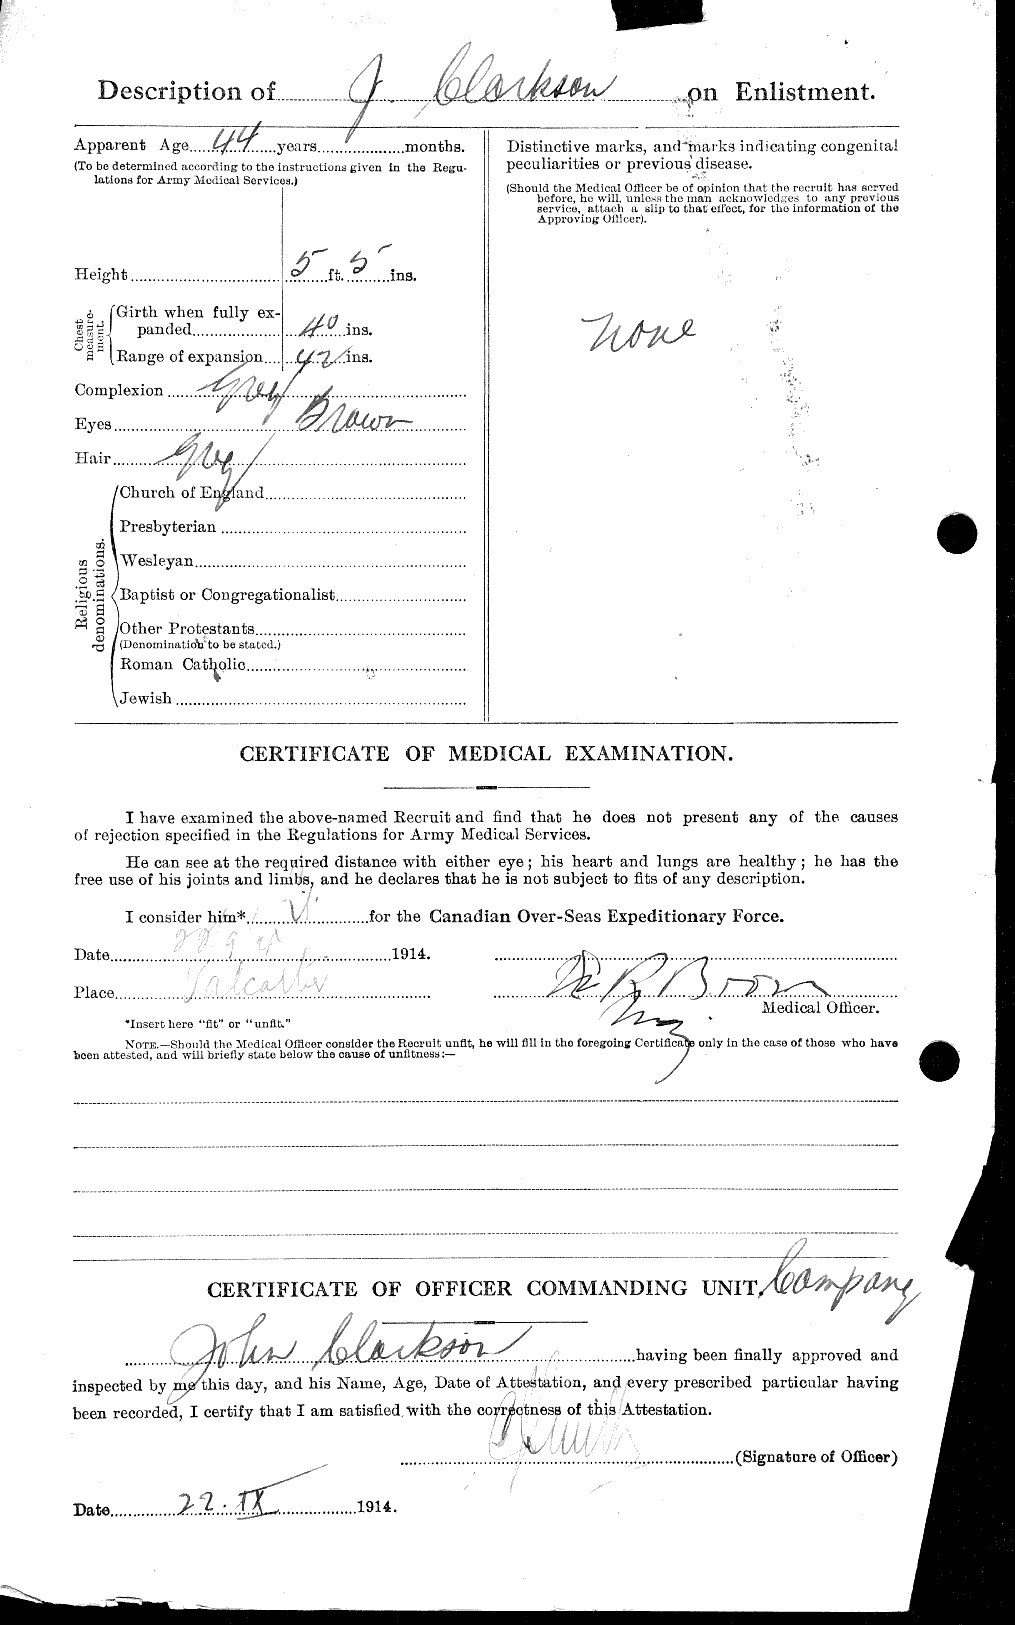 Personnel Records of the First World War - CEF 021451d